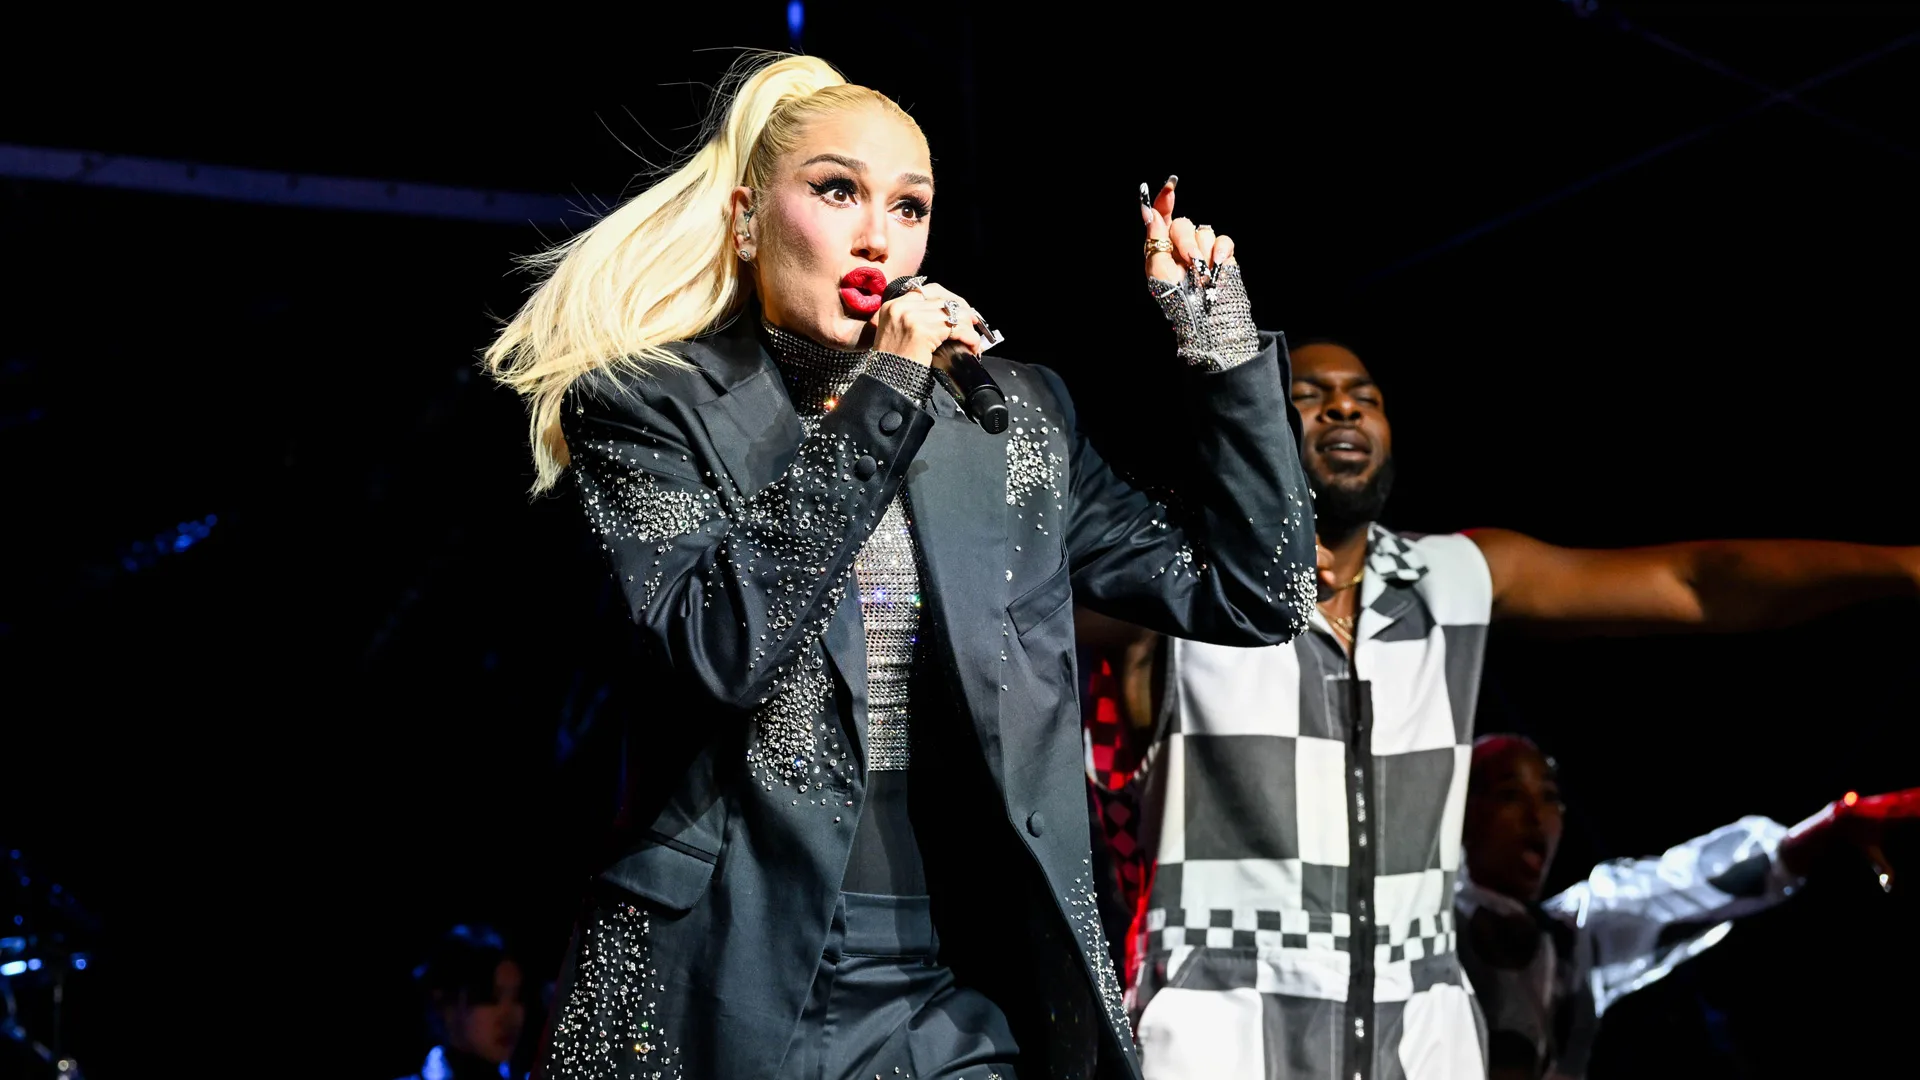 A photograph of Gwen Stefani performing on stage in a black outfits with her band member in a black and white outfit next to her